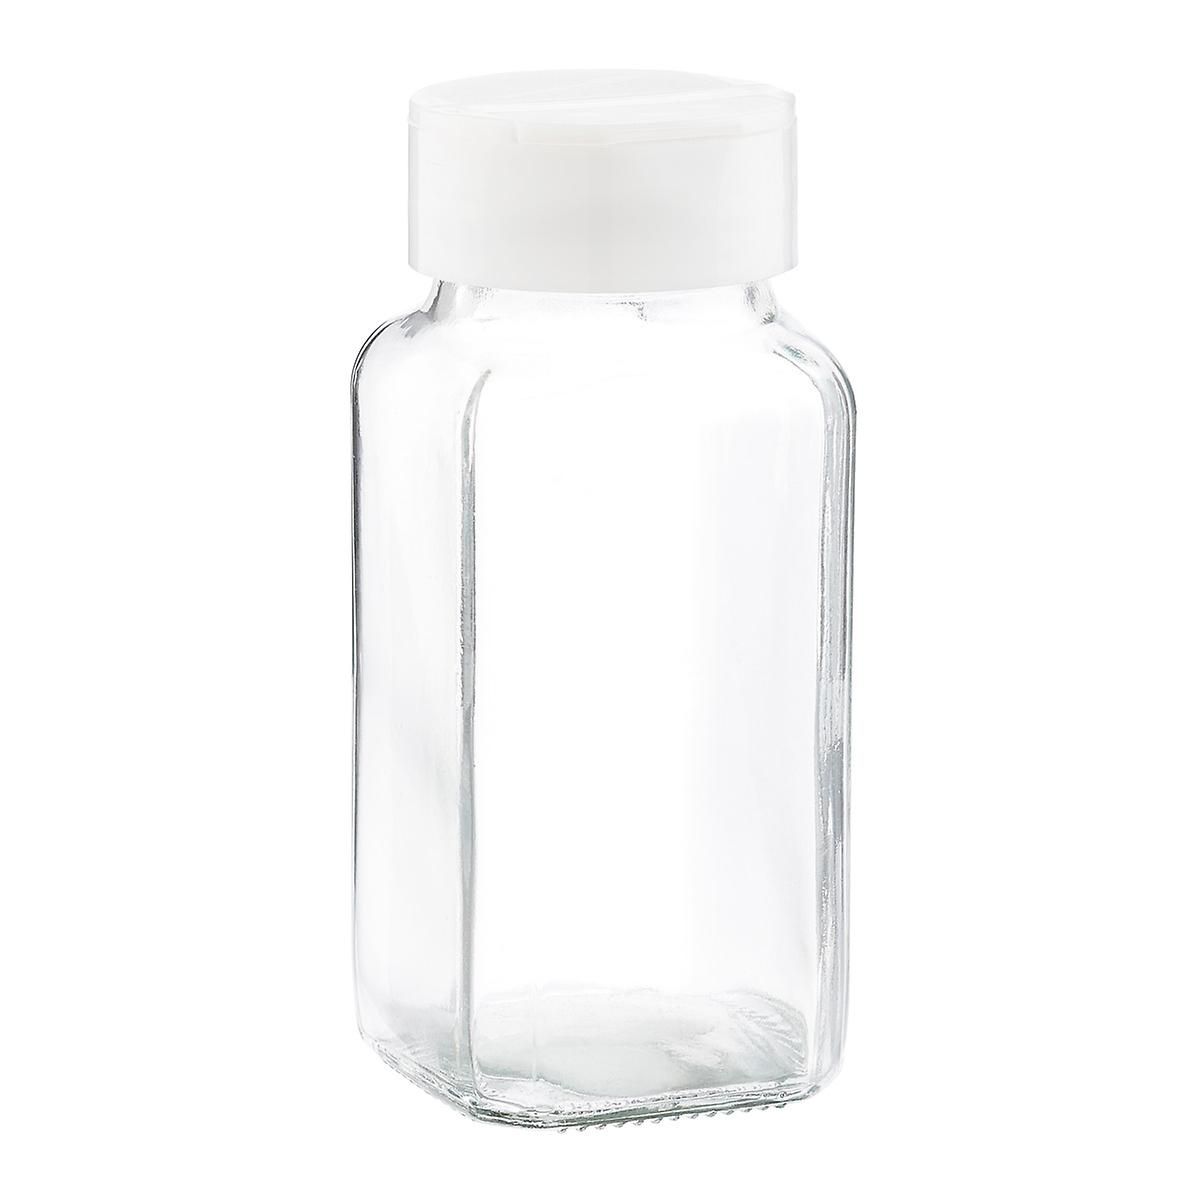 6 oz. Glass Jar with Butterfly Lid | The Container Store